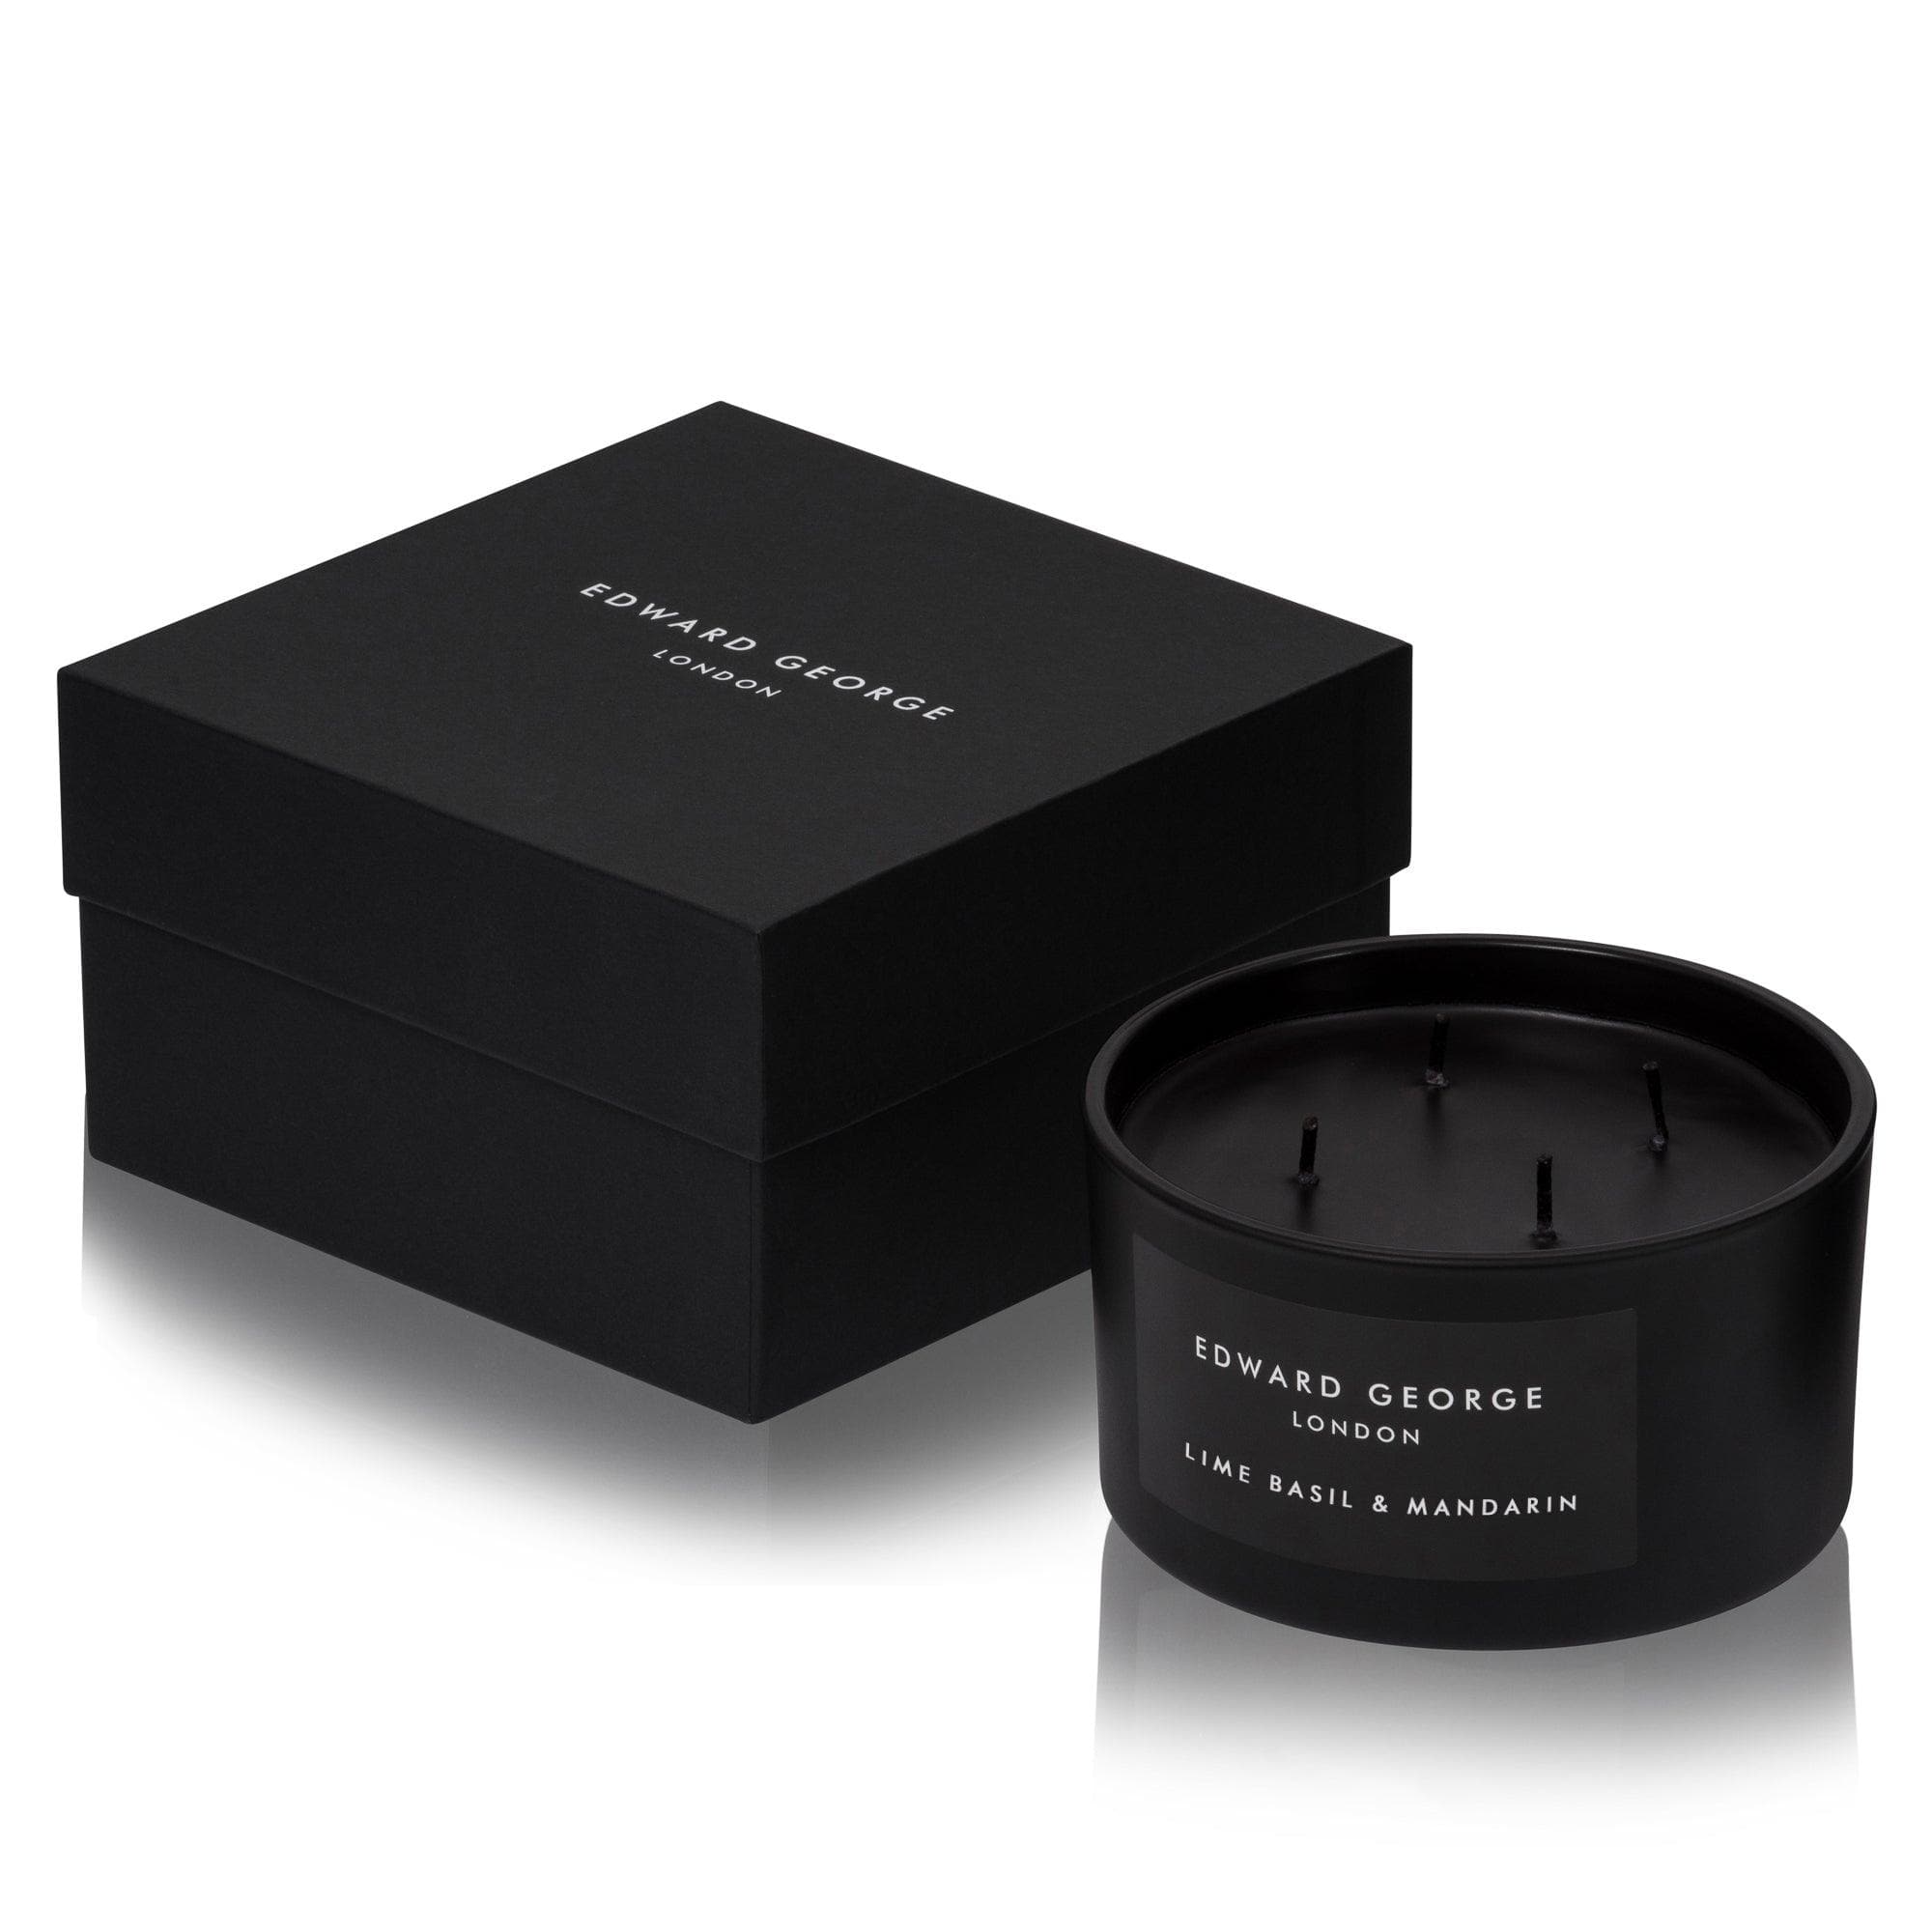 lime basil mandarin candles home fragrance decor room living edward george london luxury gift ritual scent set lid black wax mineral best wax scented candle women men large